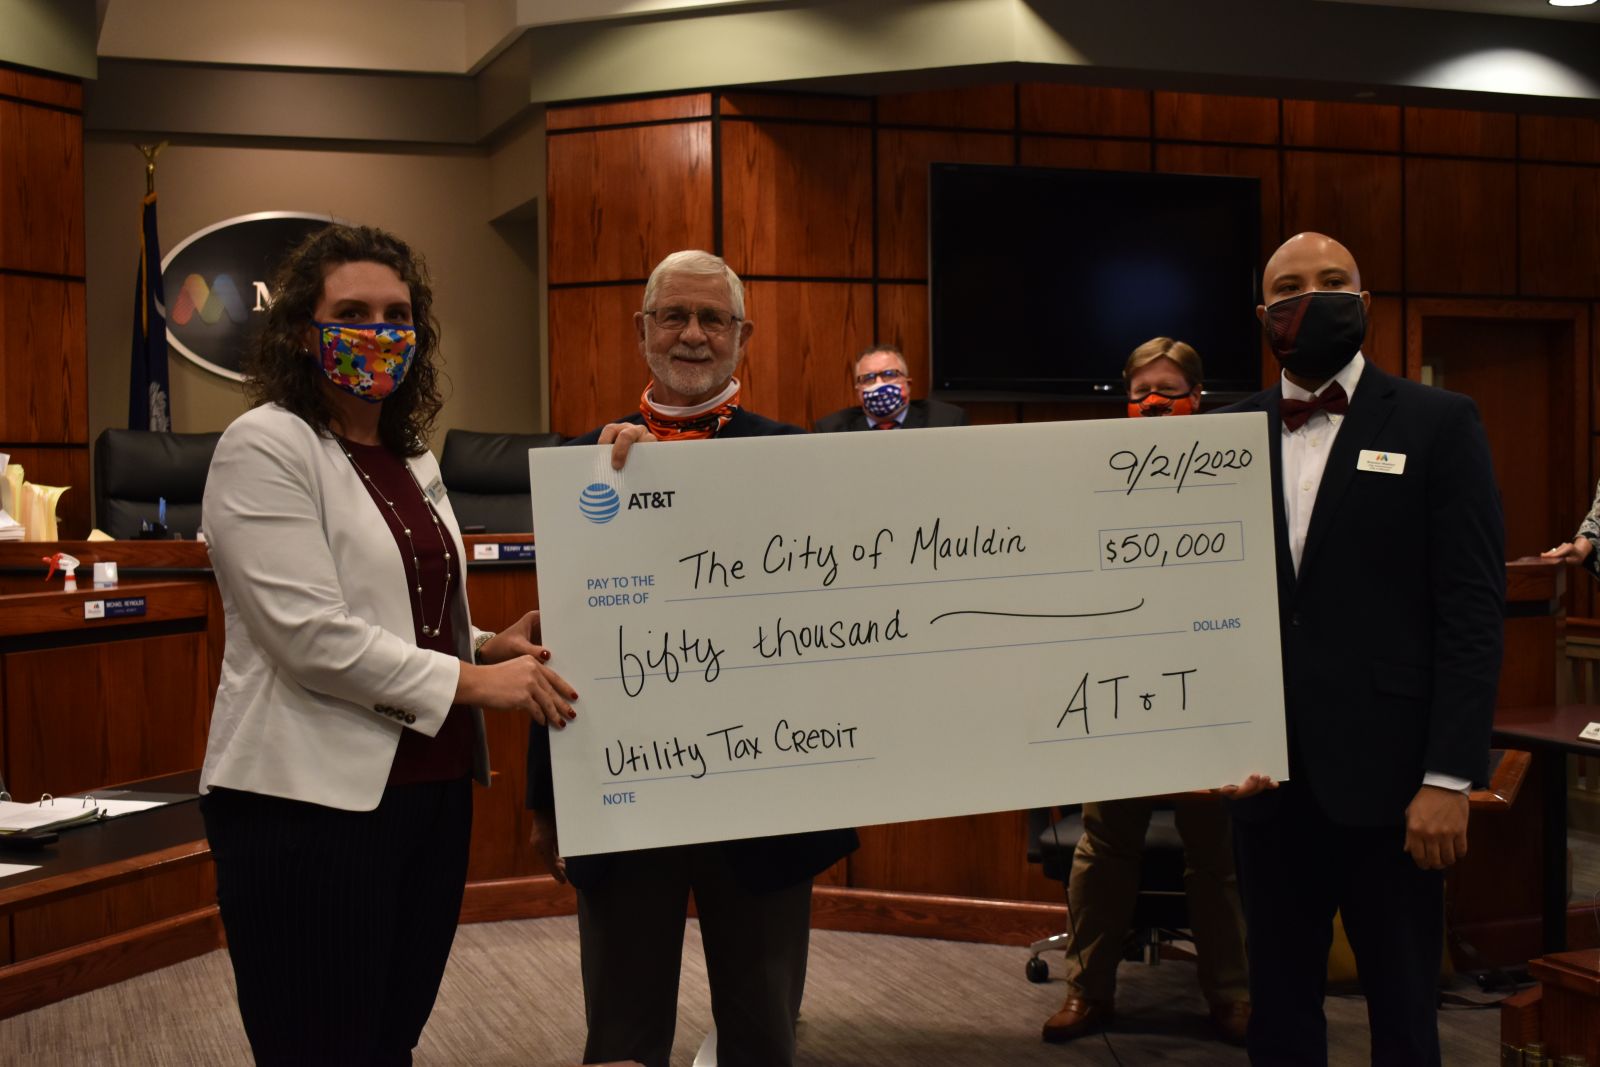 AT&T gifted the city of Mauldin $50,000 in utility tax credits for the construction of a trailhead on the proposed extension of the Swamp Rabbit Trail. (Photo/Molly Hulsey)